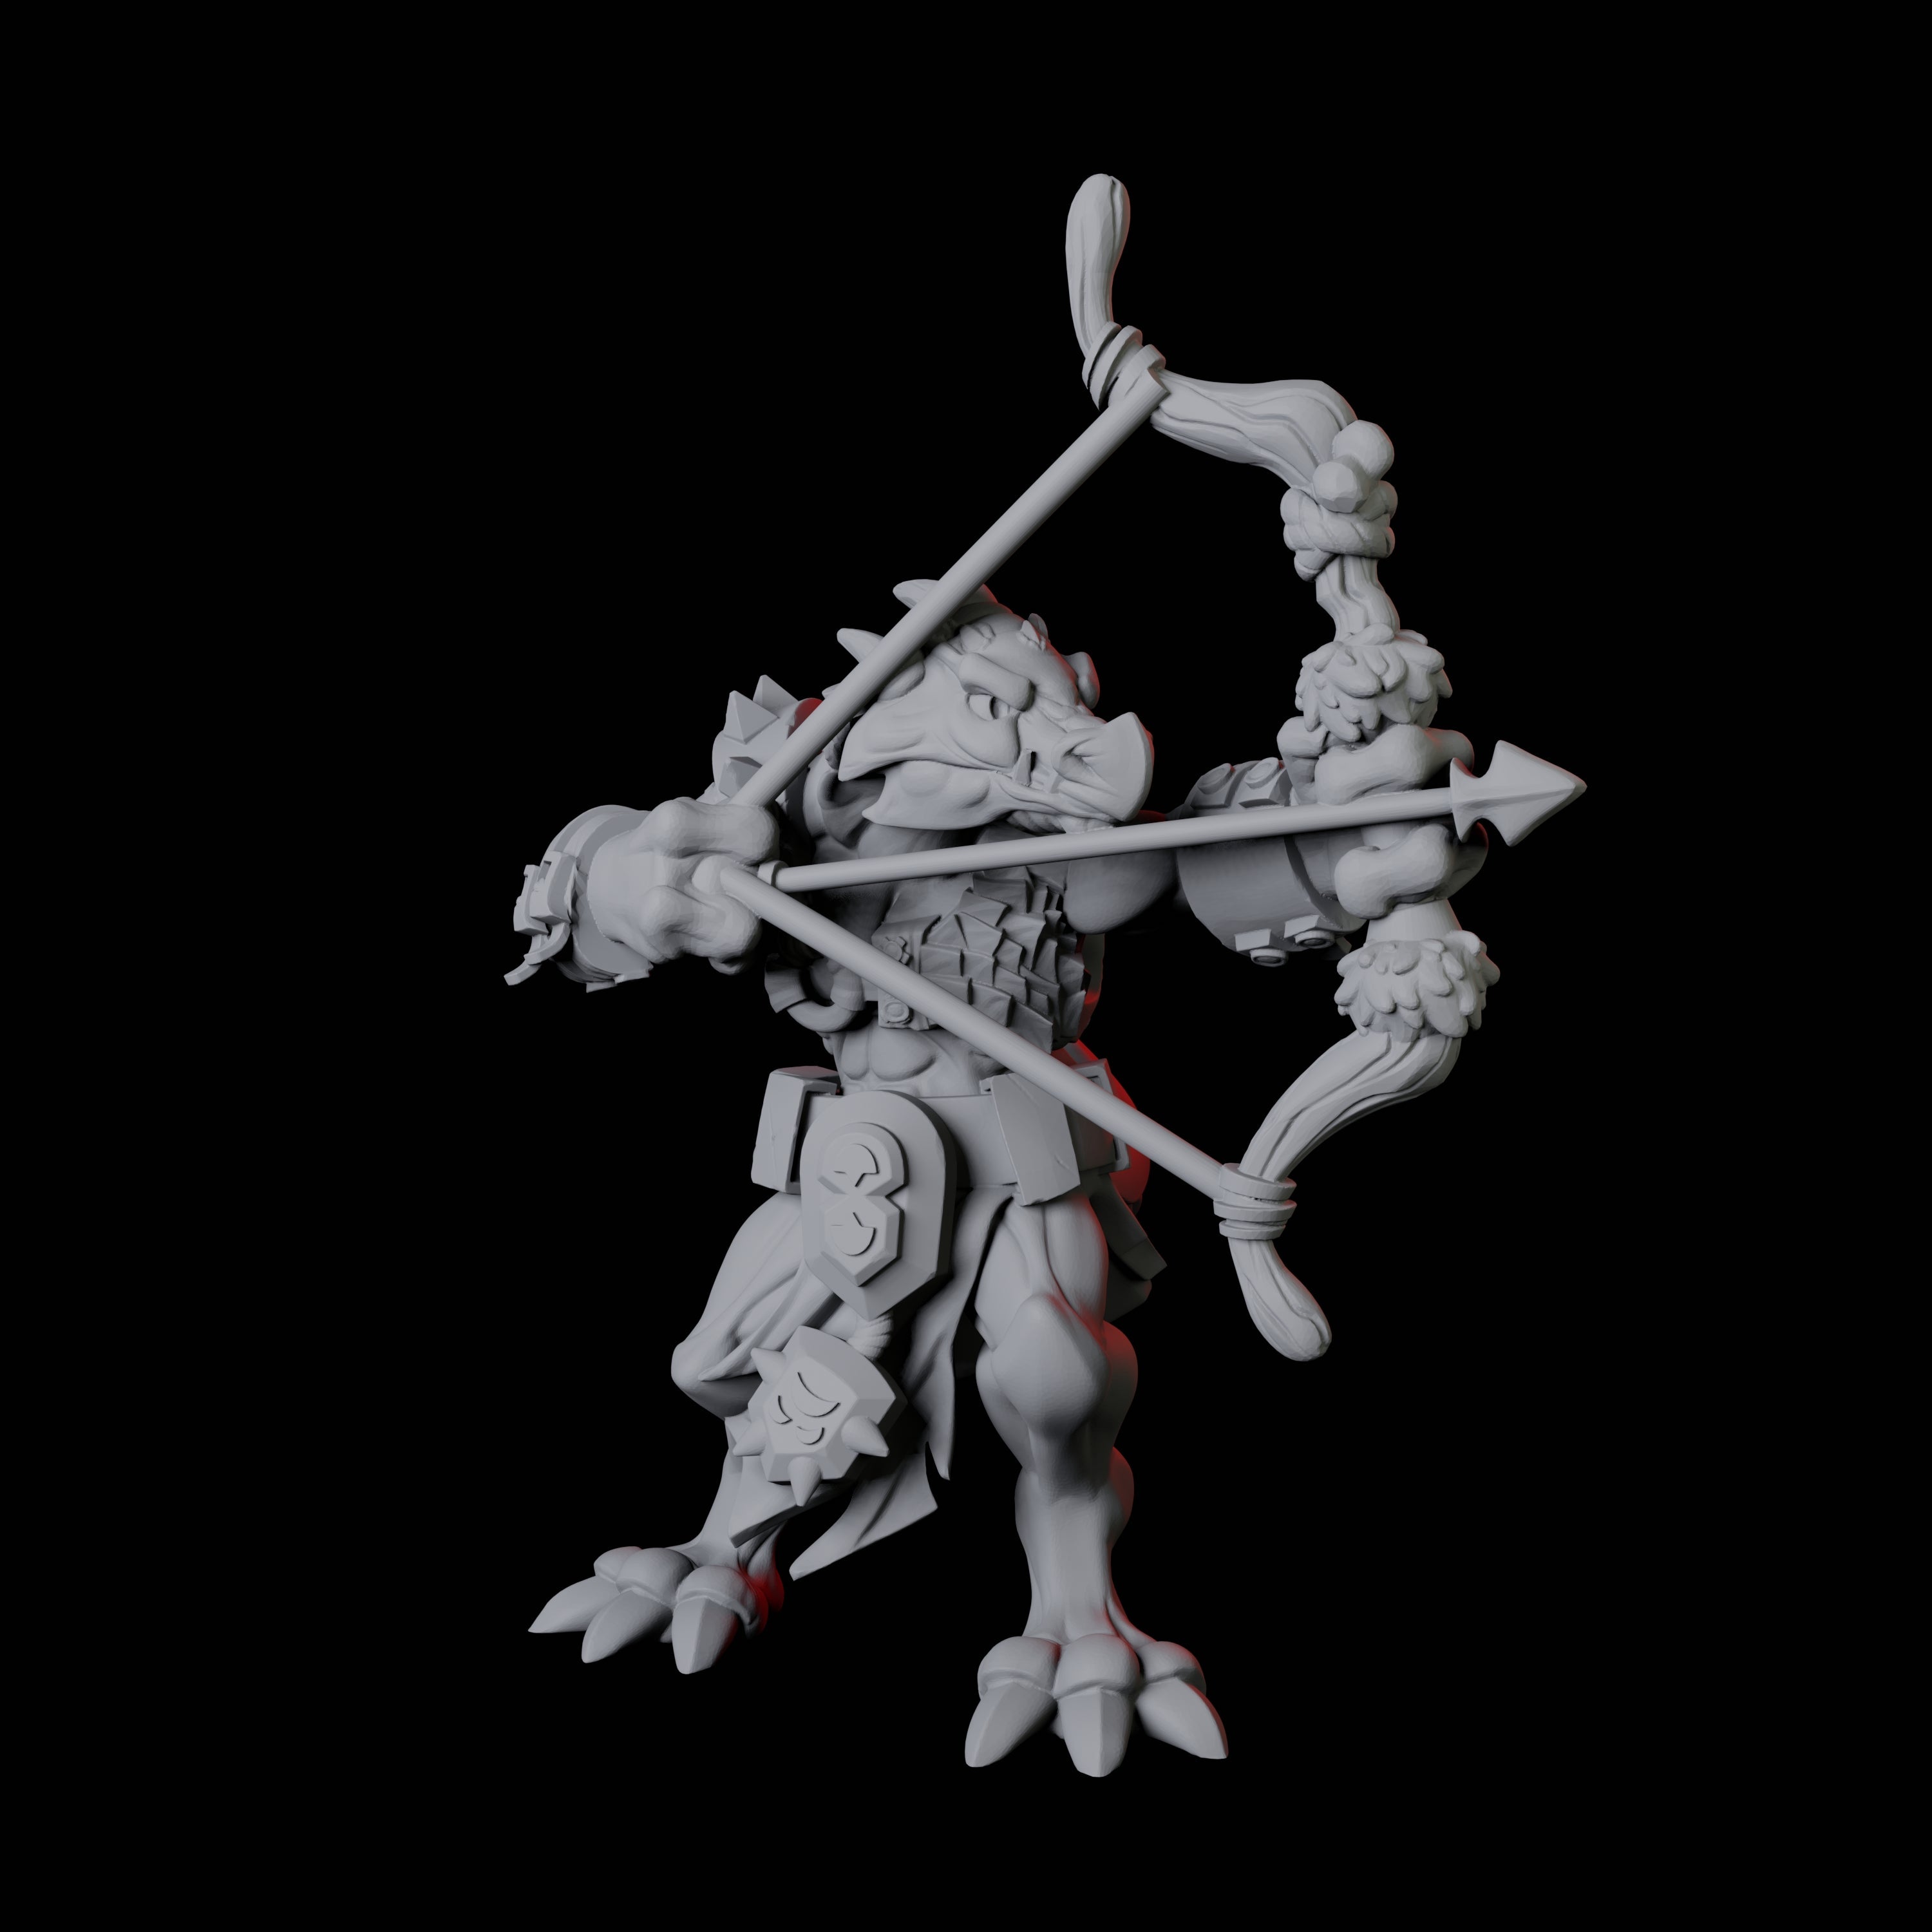 Kobold Ranger A Miniature for Dungeons and Dragons, Pathfinder or other TTRPGs